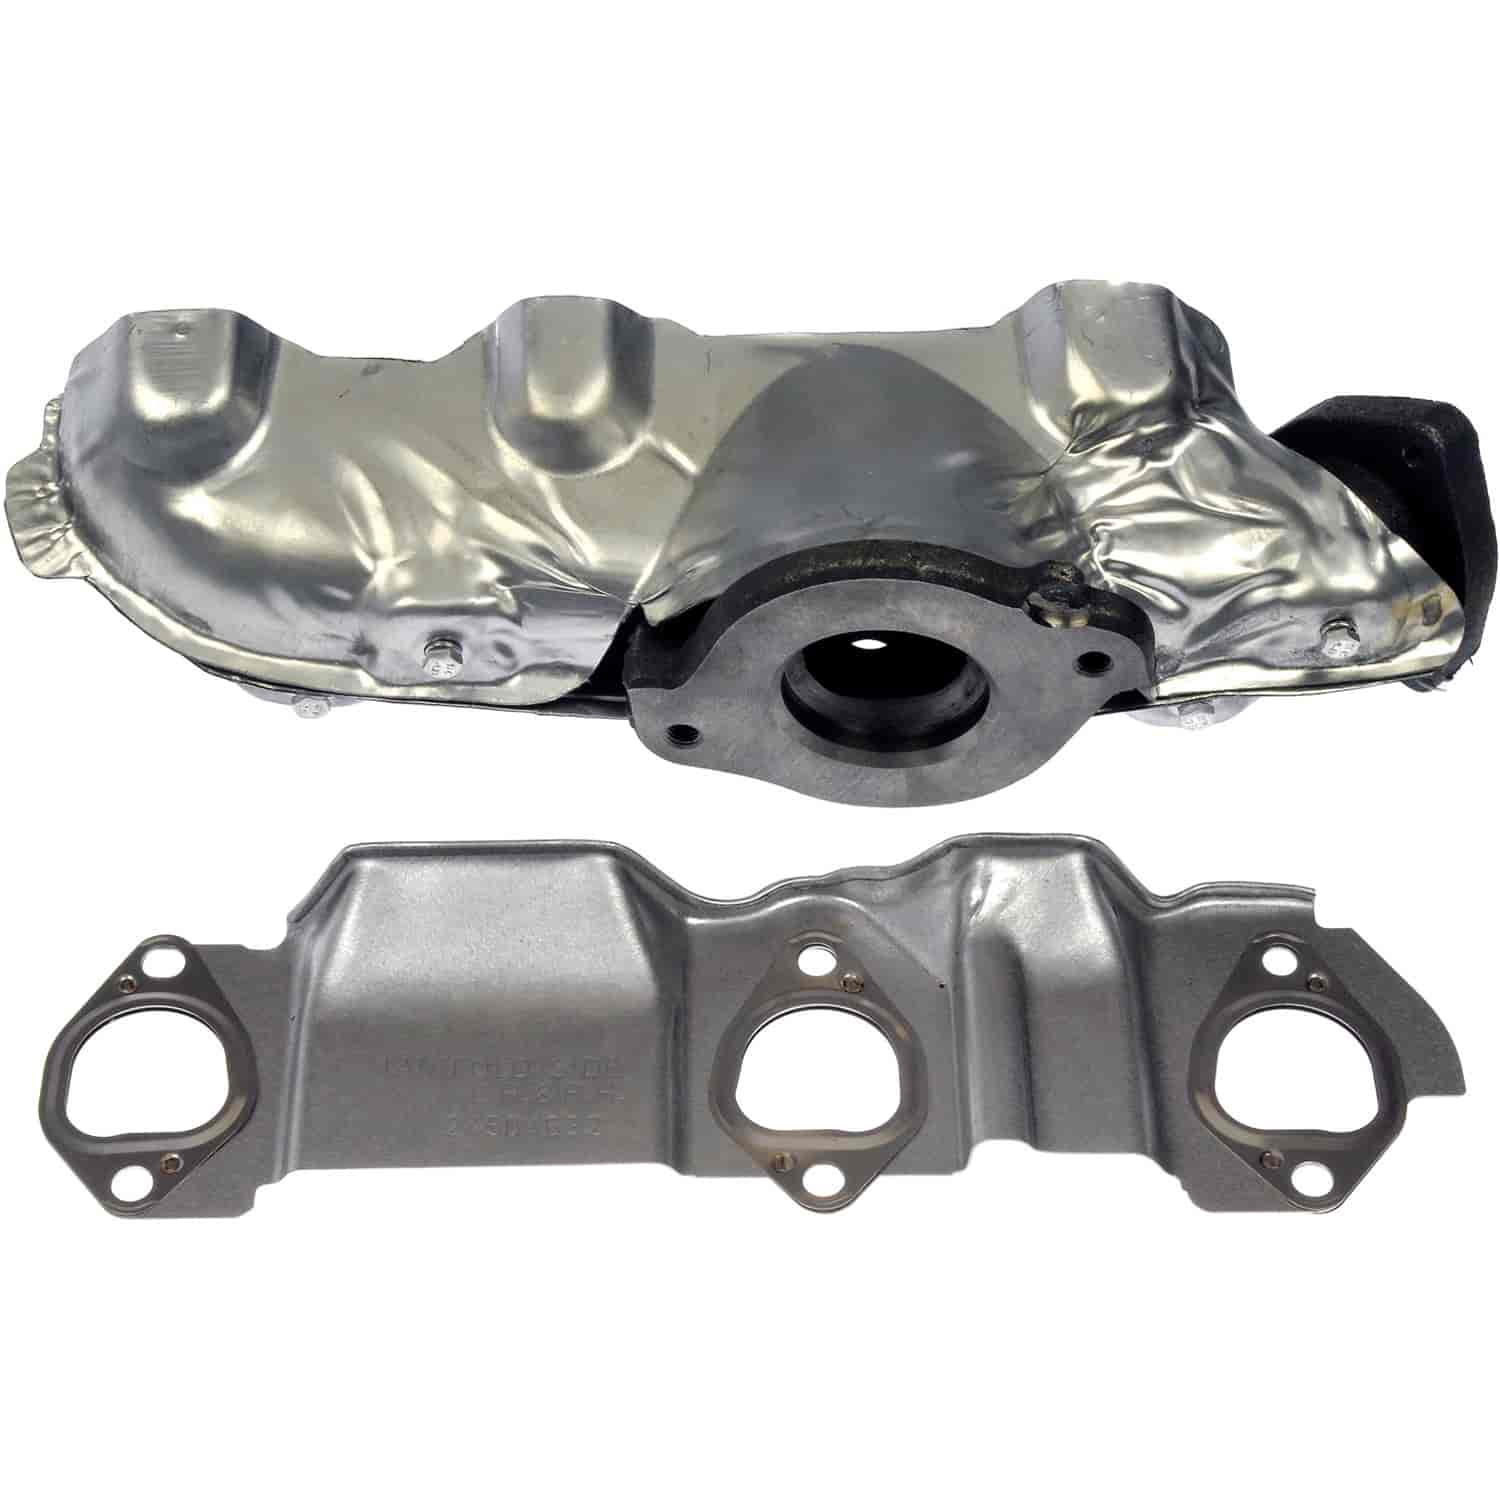 Cast Iron Exhaust Manifold. Includes Gaskets and Hardware